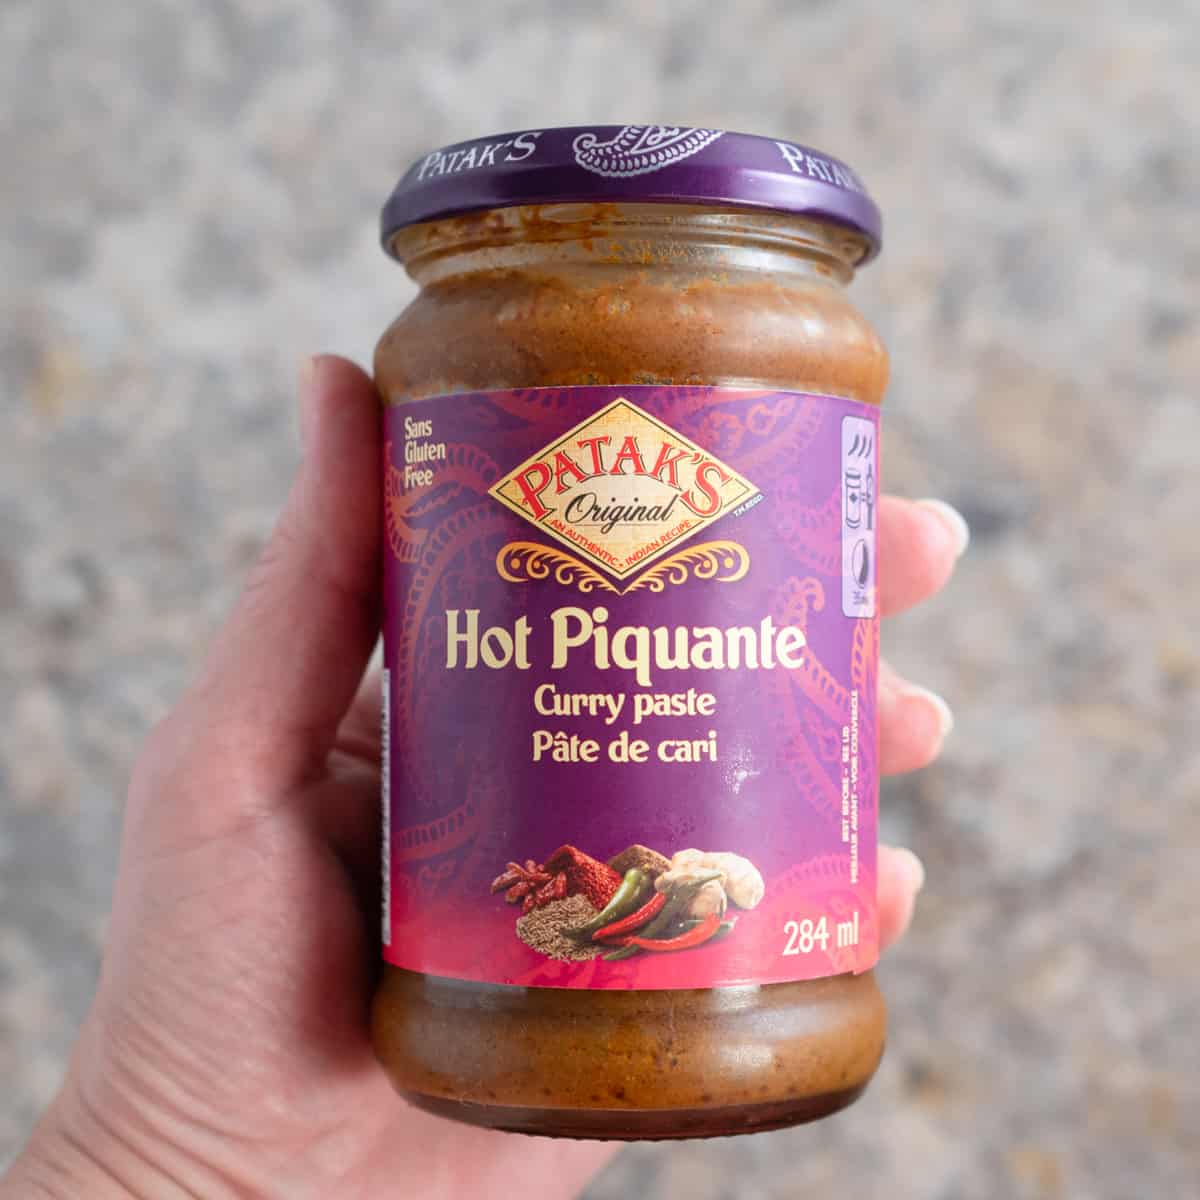 A jar of Patak's Hot Curry paste.